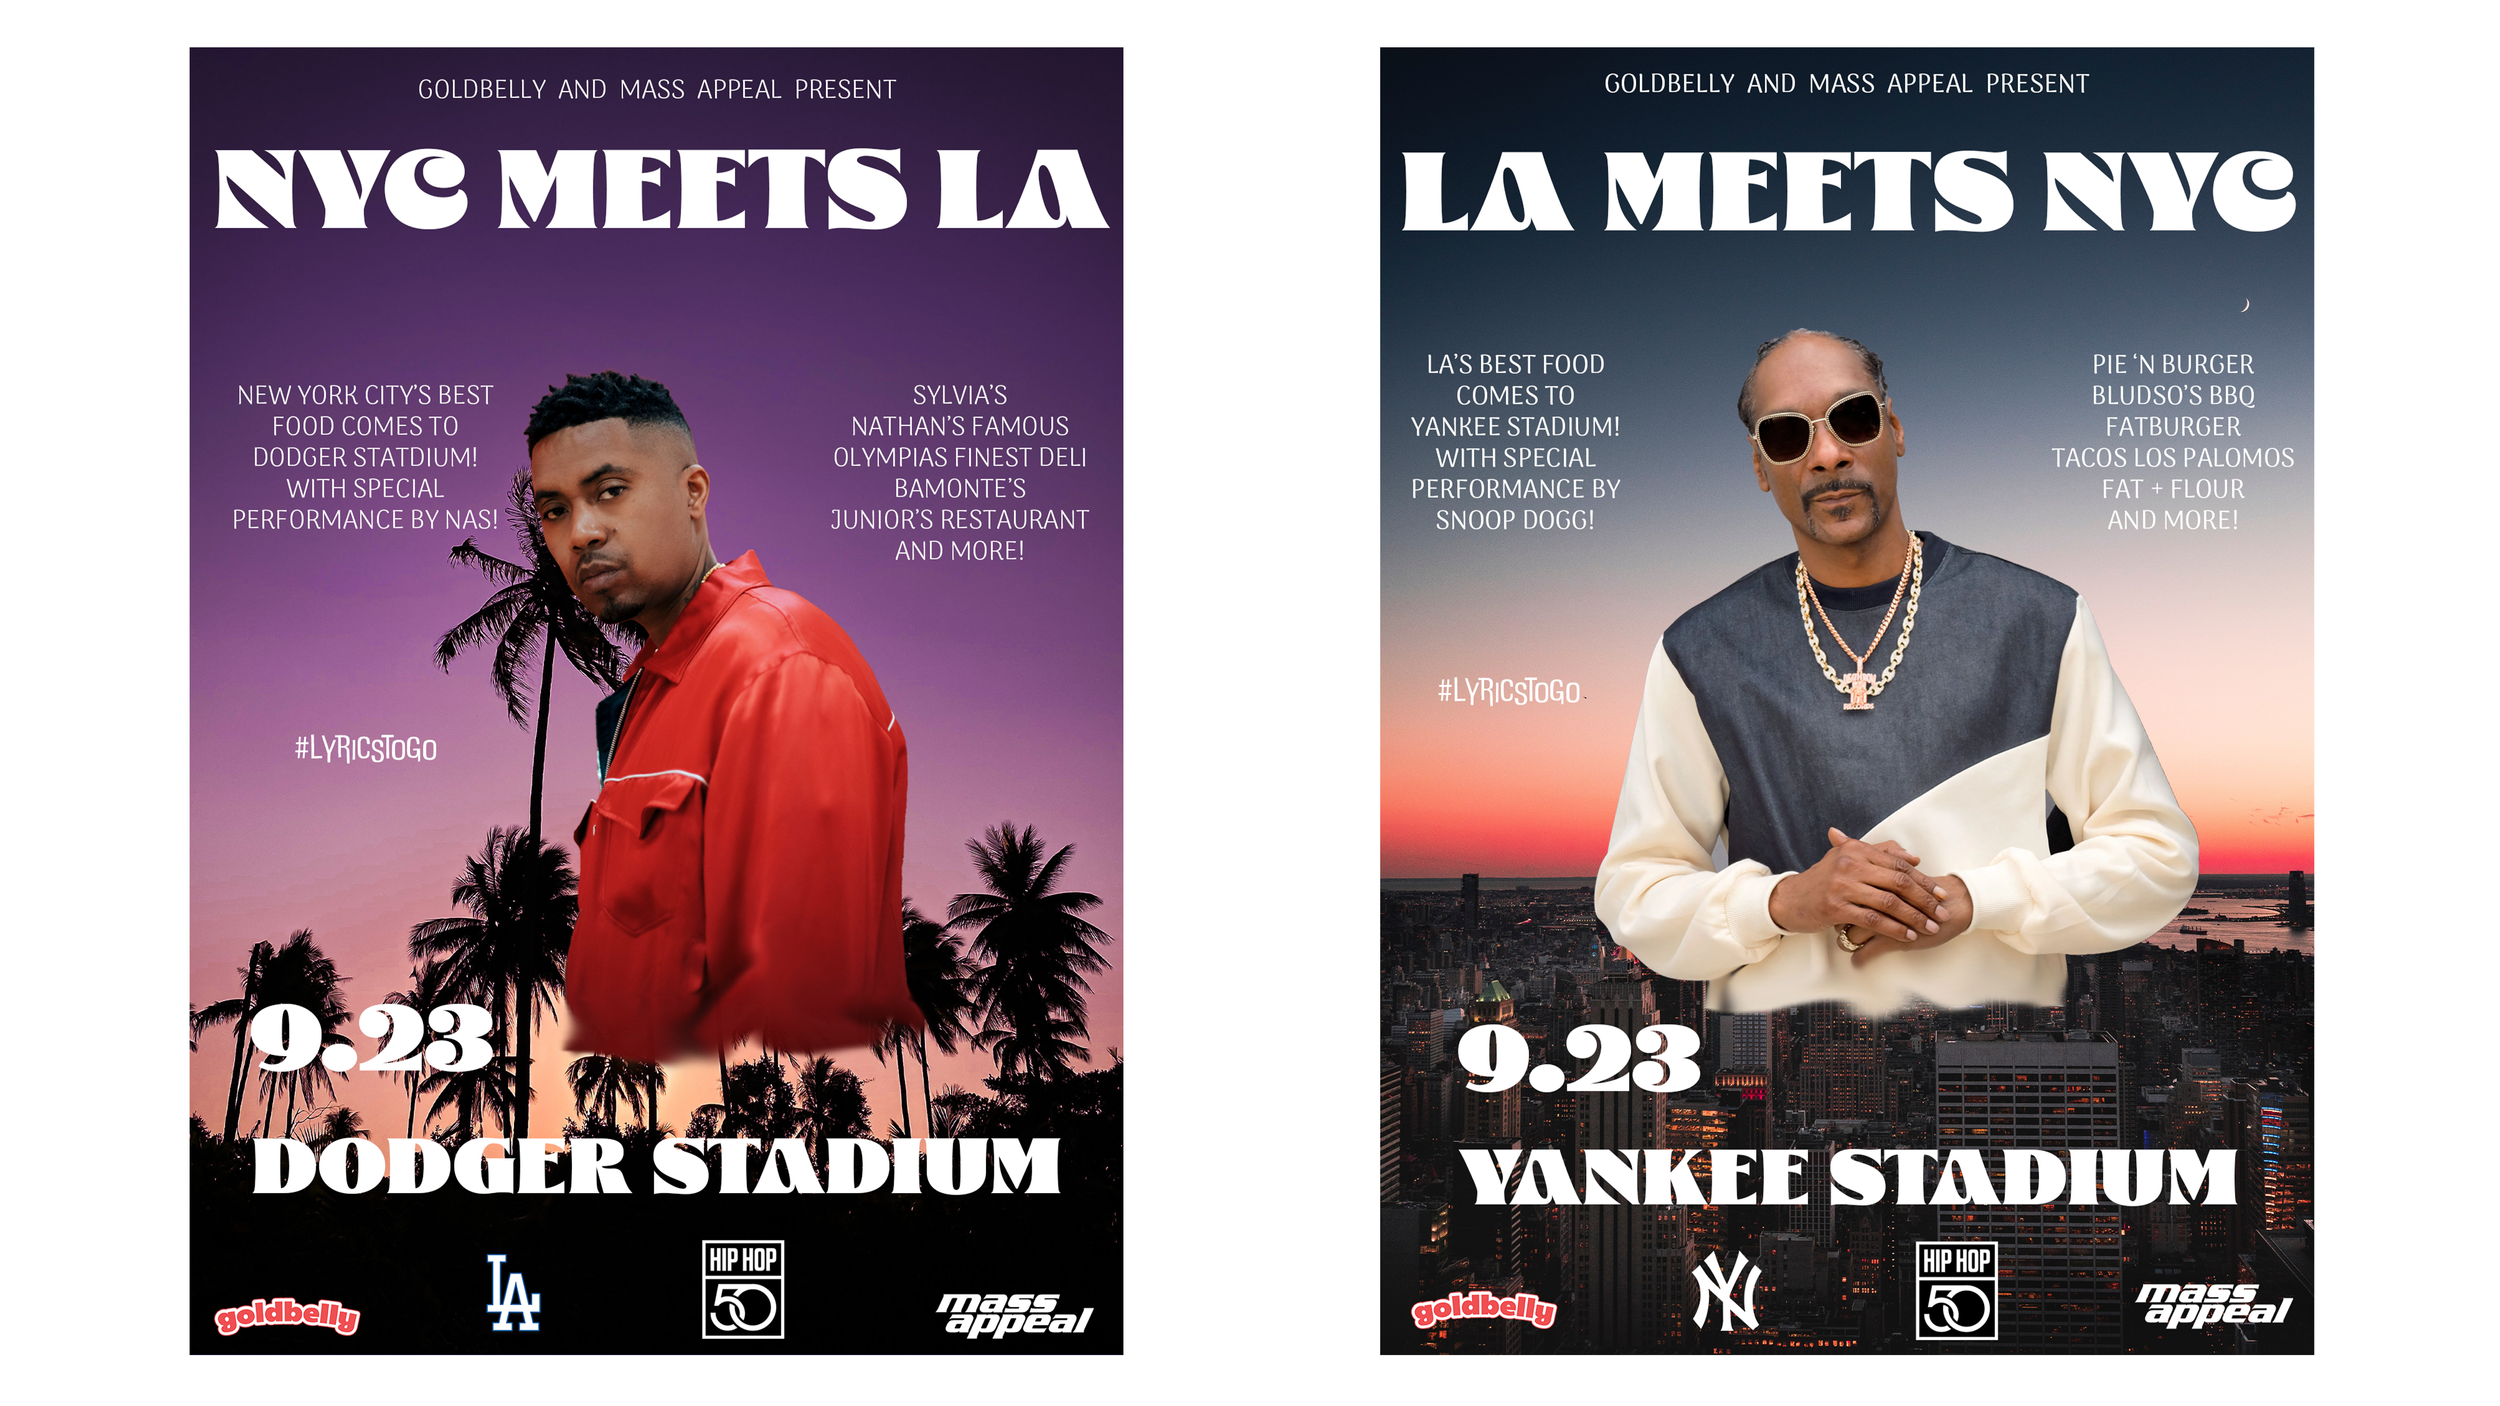  We will partner with Mass Appeal to bring a taste of NYC to LA with a performance by Nas and a taste of LA to NYC with a performance by Snoop Dogg on the same night. Some of the most popular food spots from each city will be in attendance. This will